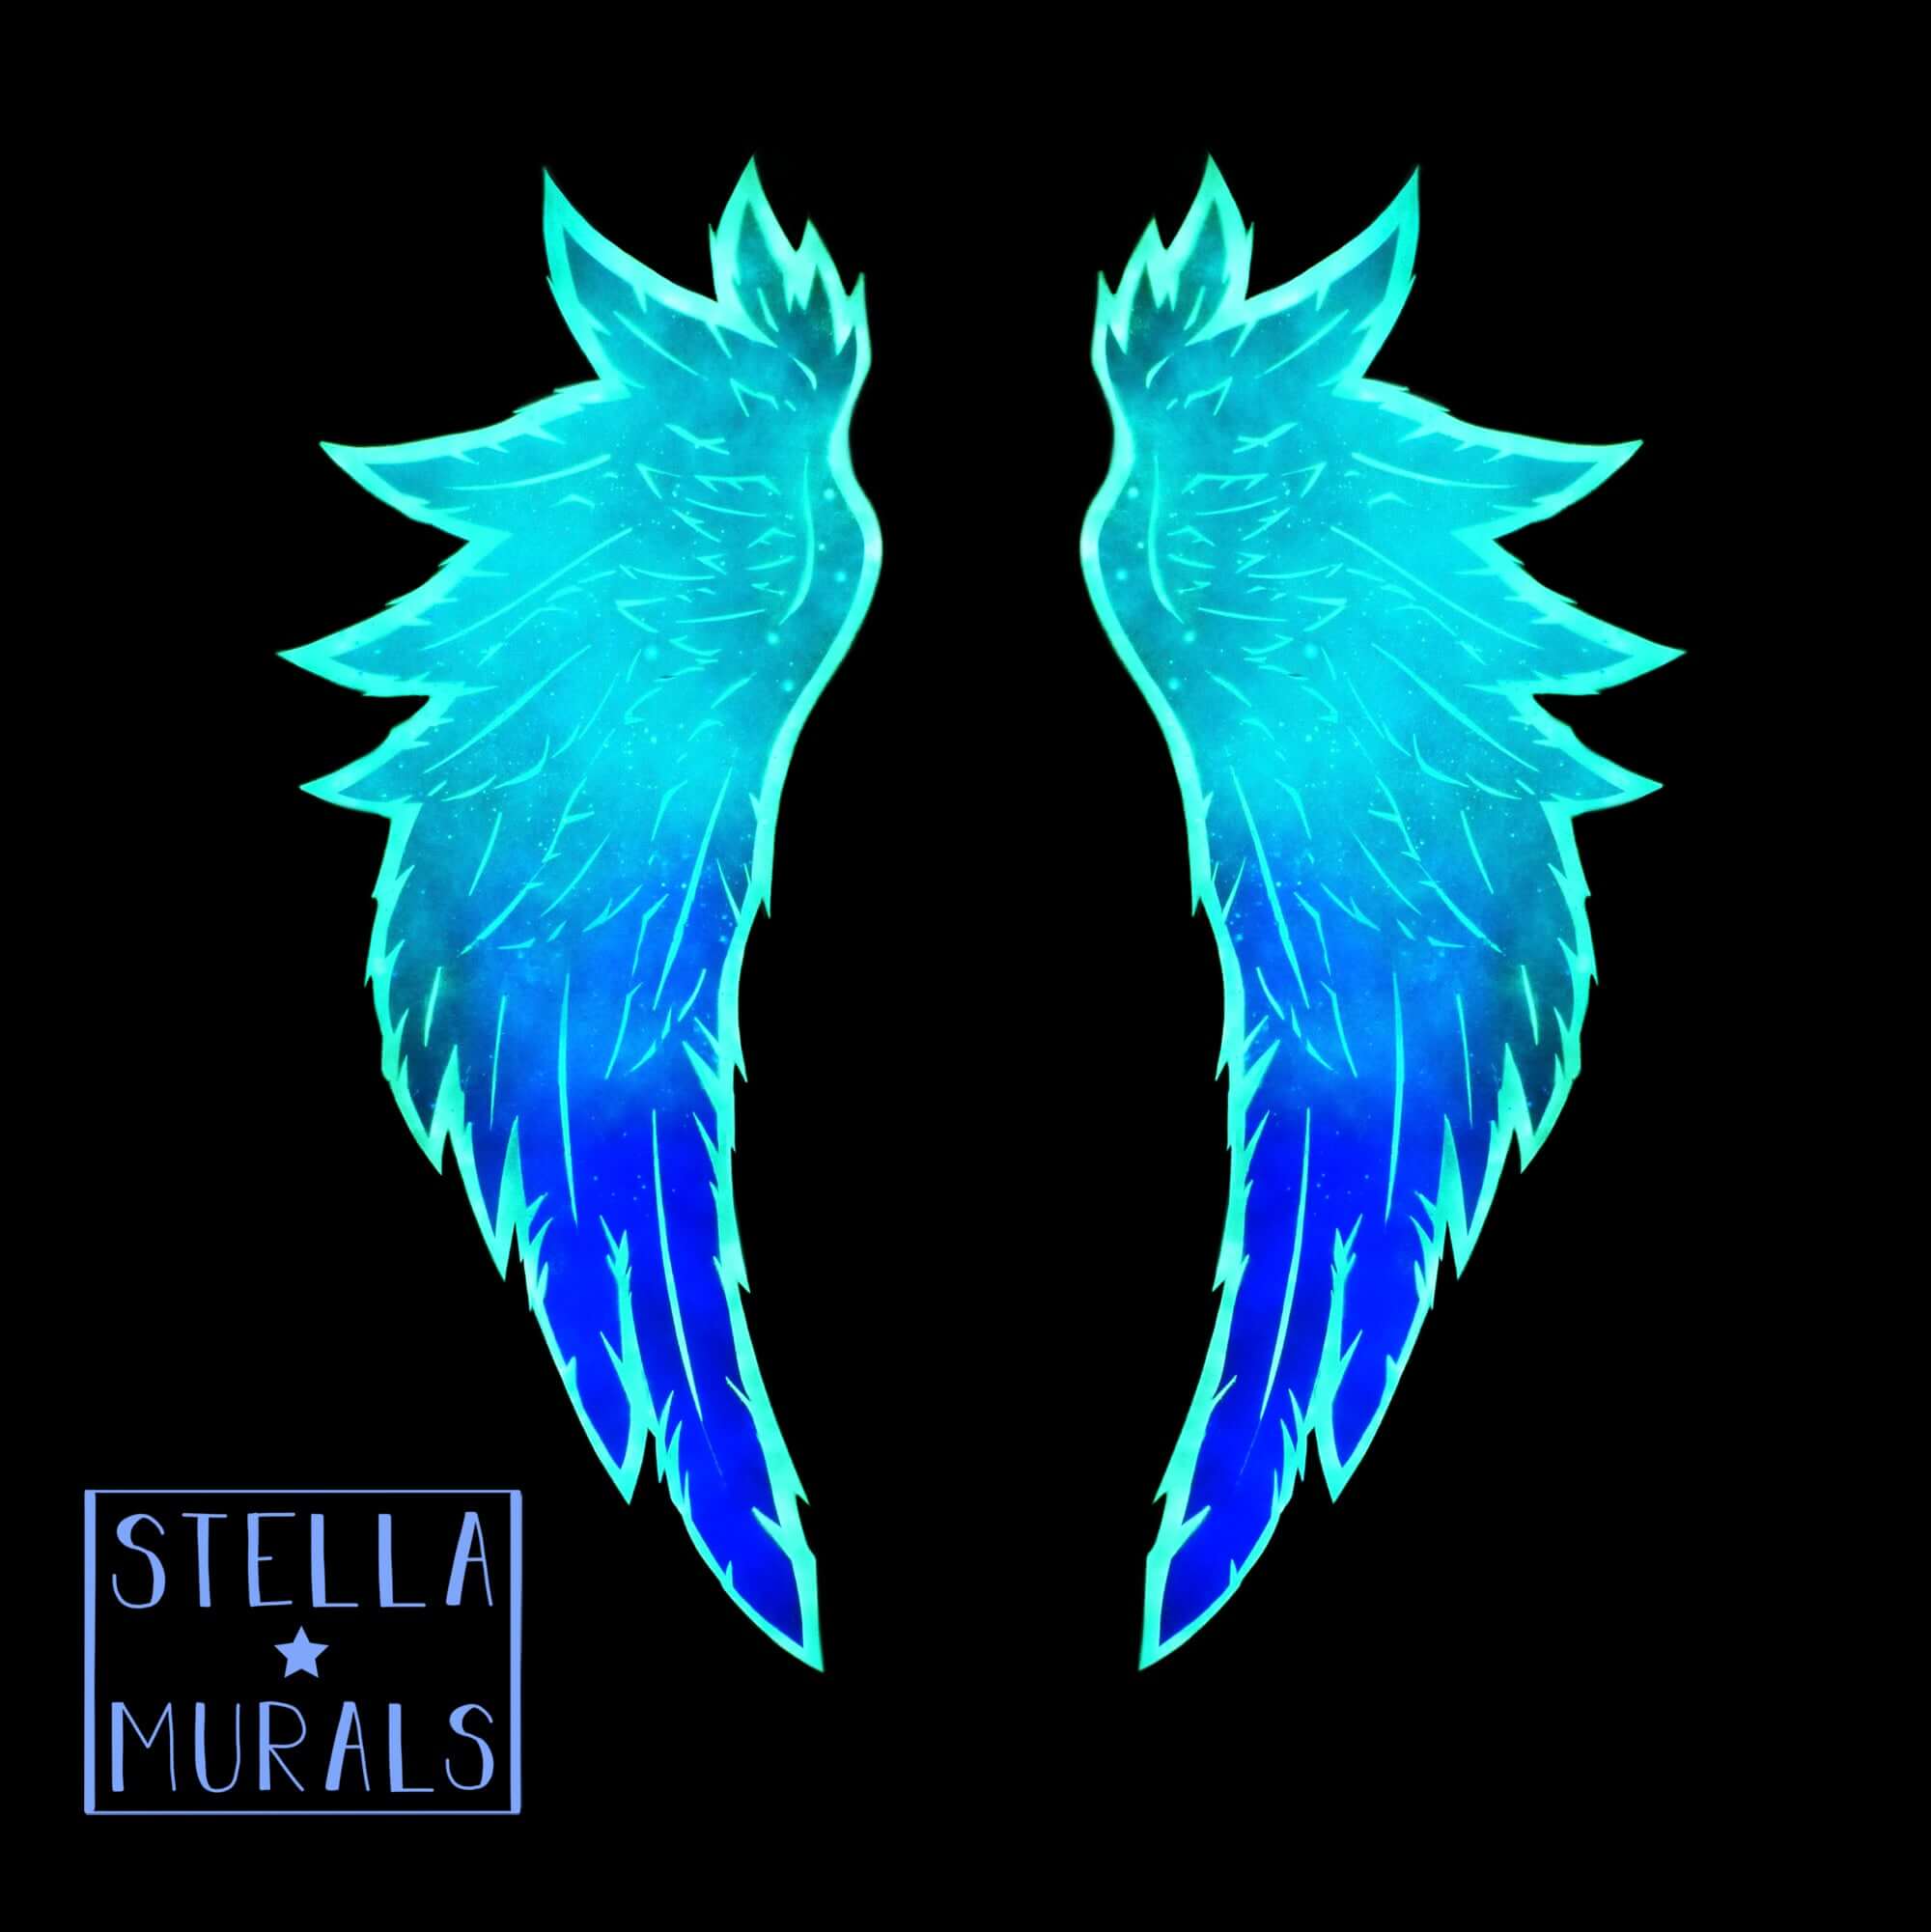 Glow in the dark Angel wings decal, mystic celestial, ethereal and heavenly home decor decal sticker for a bedroom wall